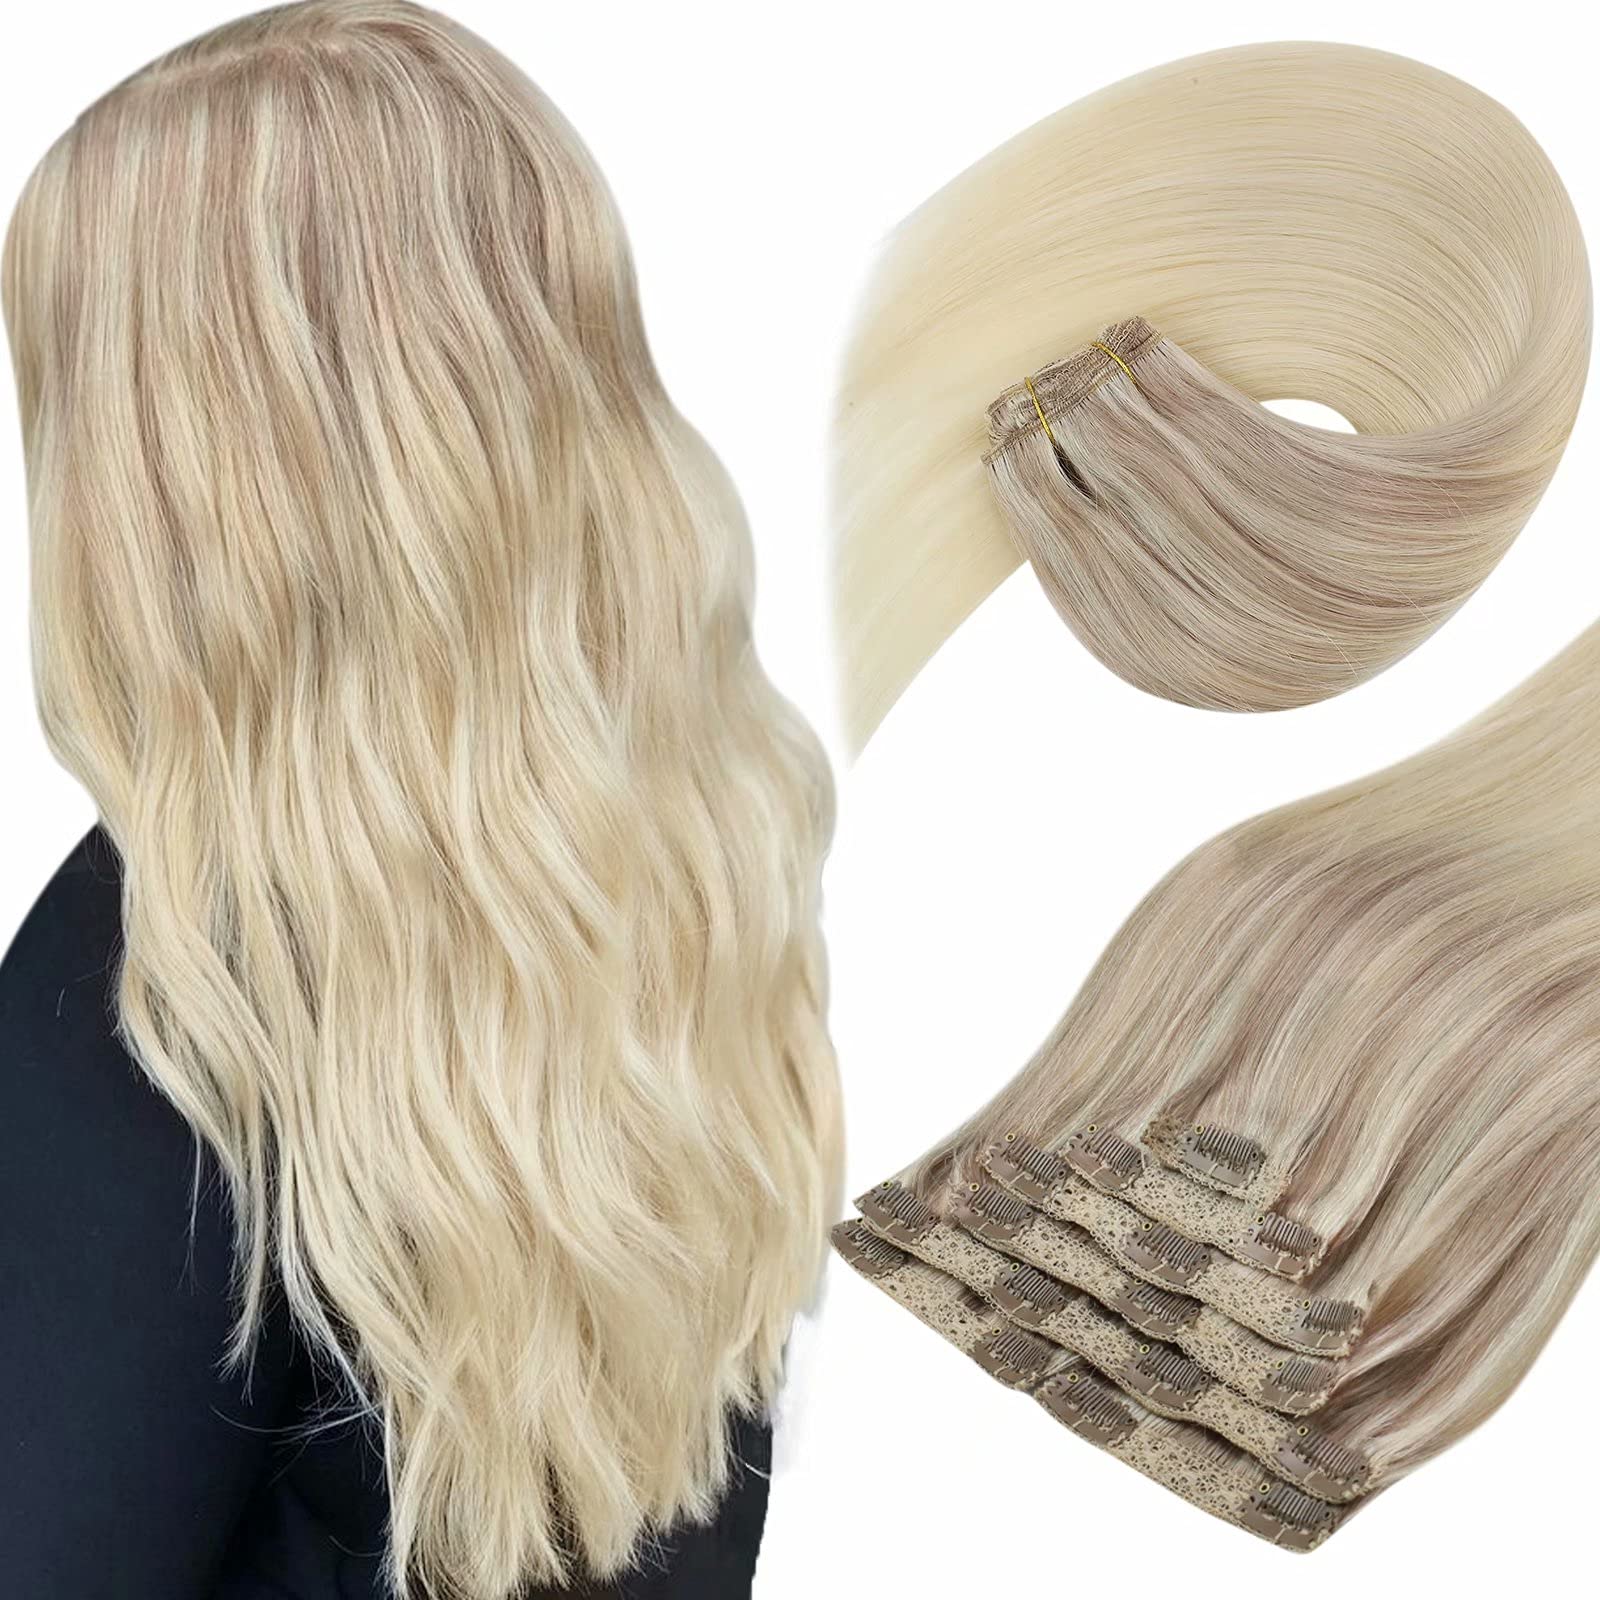 Sunny Hair Sunny Clip In Hair Extensions Ombre Blonde Clip In Hair Extensions Real Human Hair Ash Blonde Ombre Platinum Blonde Clip In Real